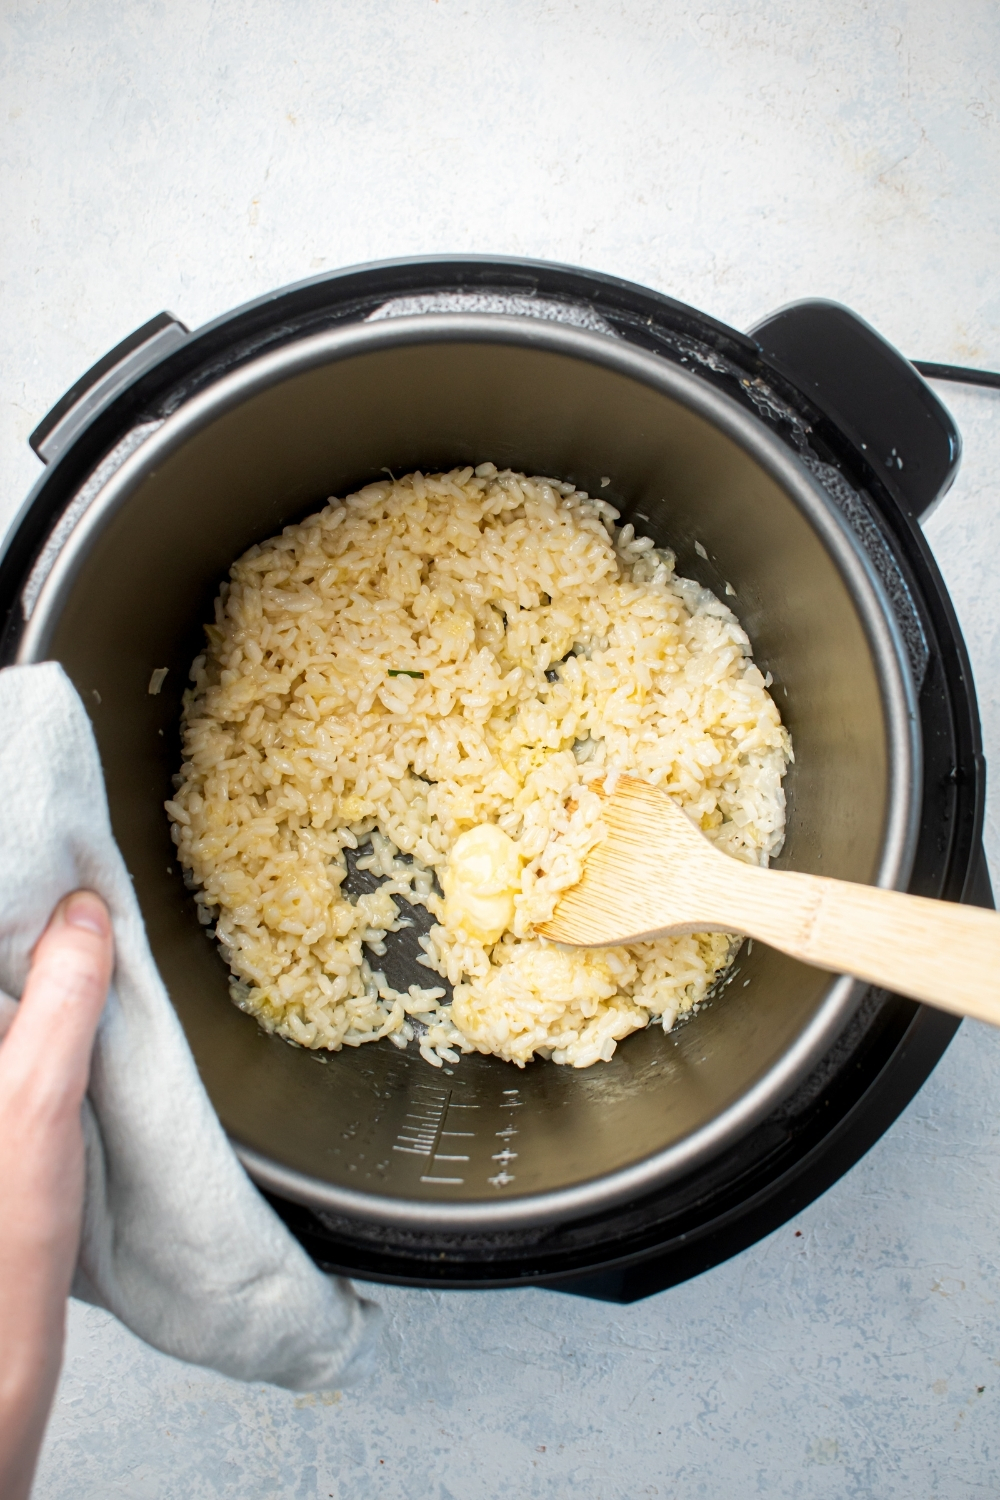 And instant pot filled with risotto with a wooden spoon submerged in it..